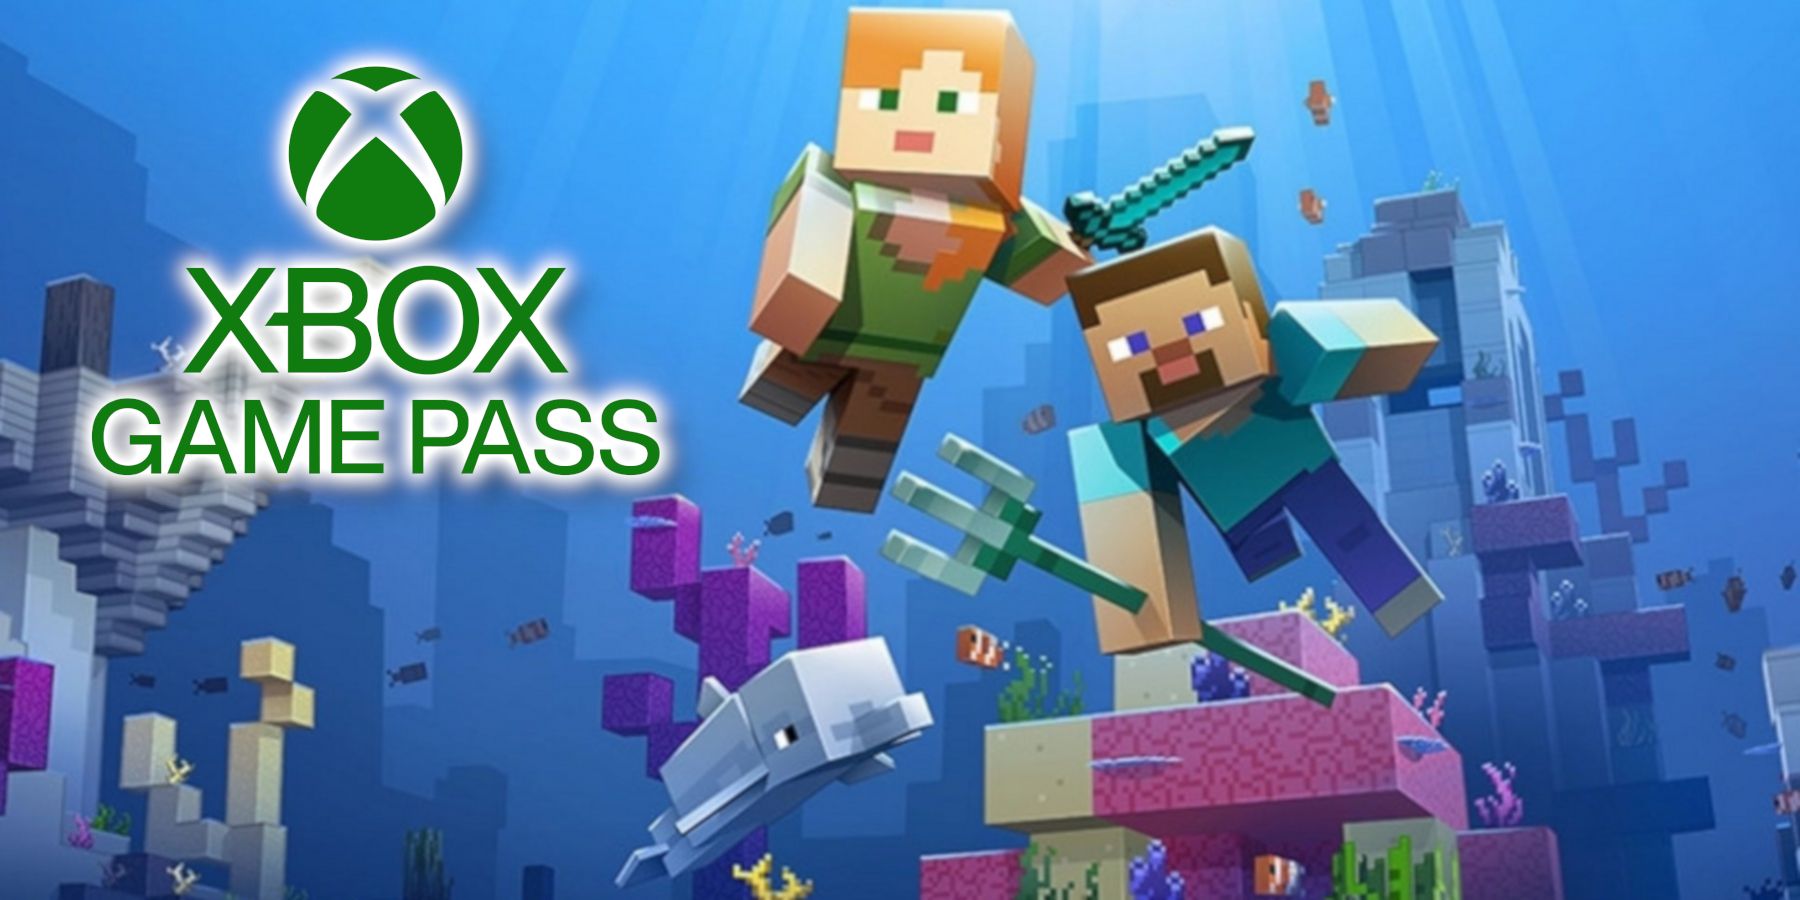 An image from Minecraft showing two characters under water with the Xbox Game Pass logo in one corner.